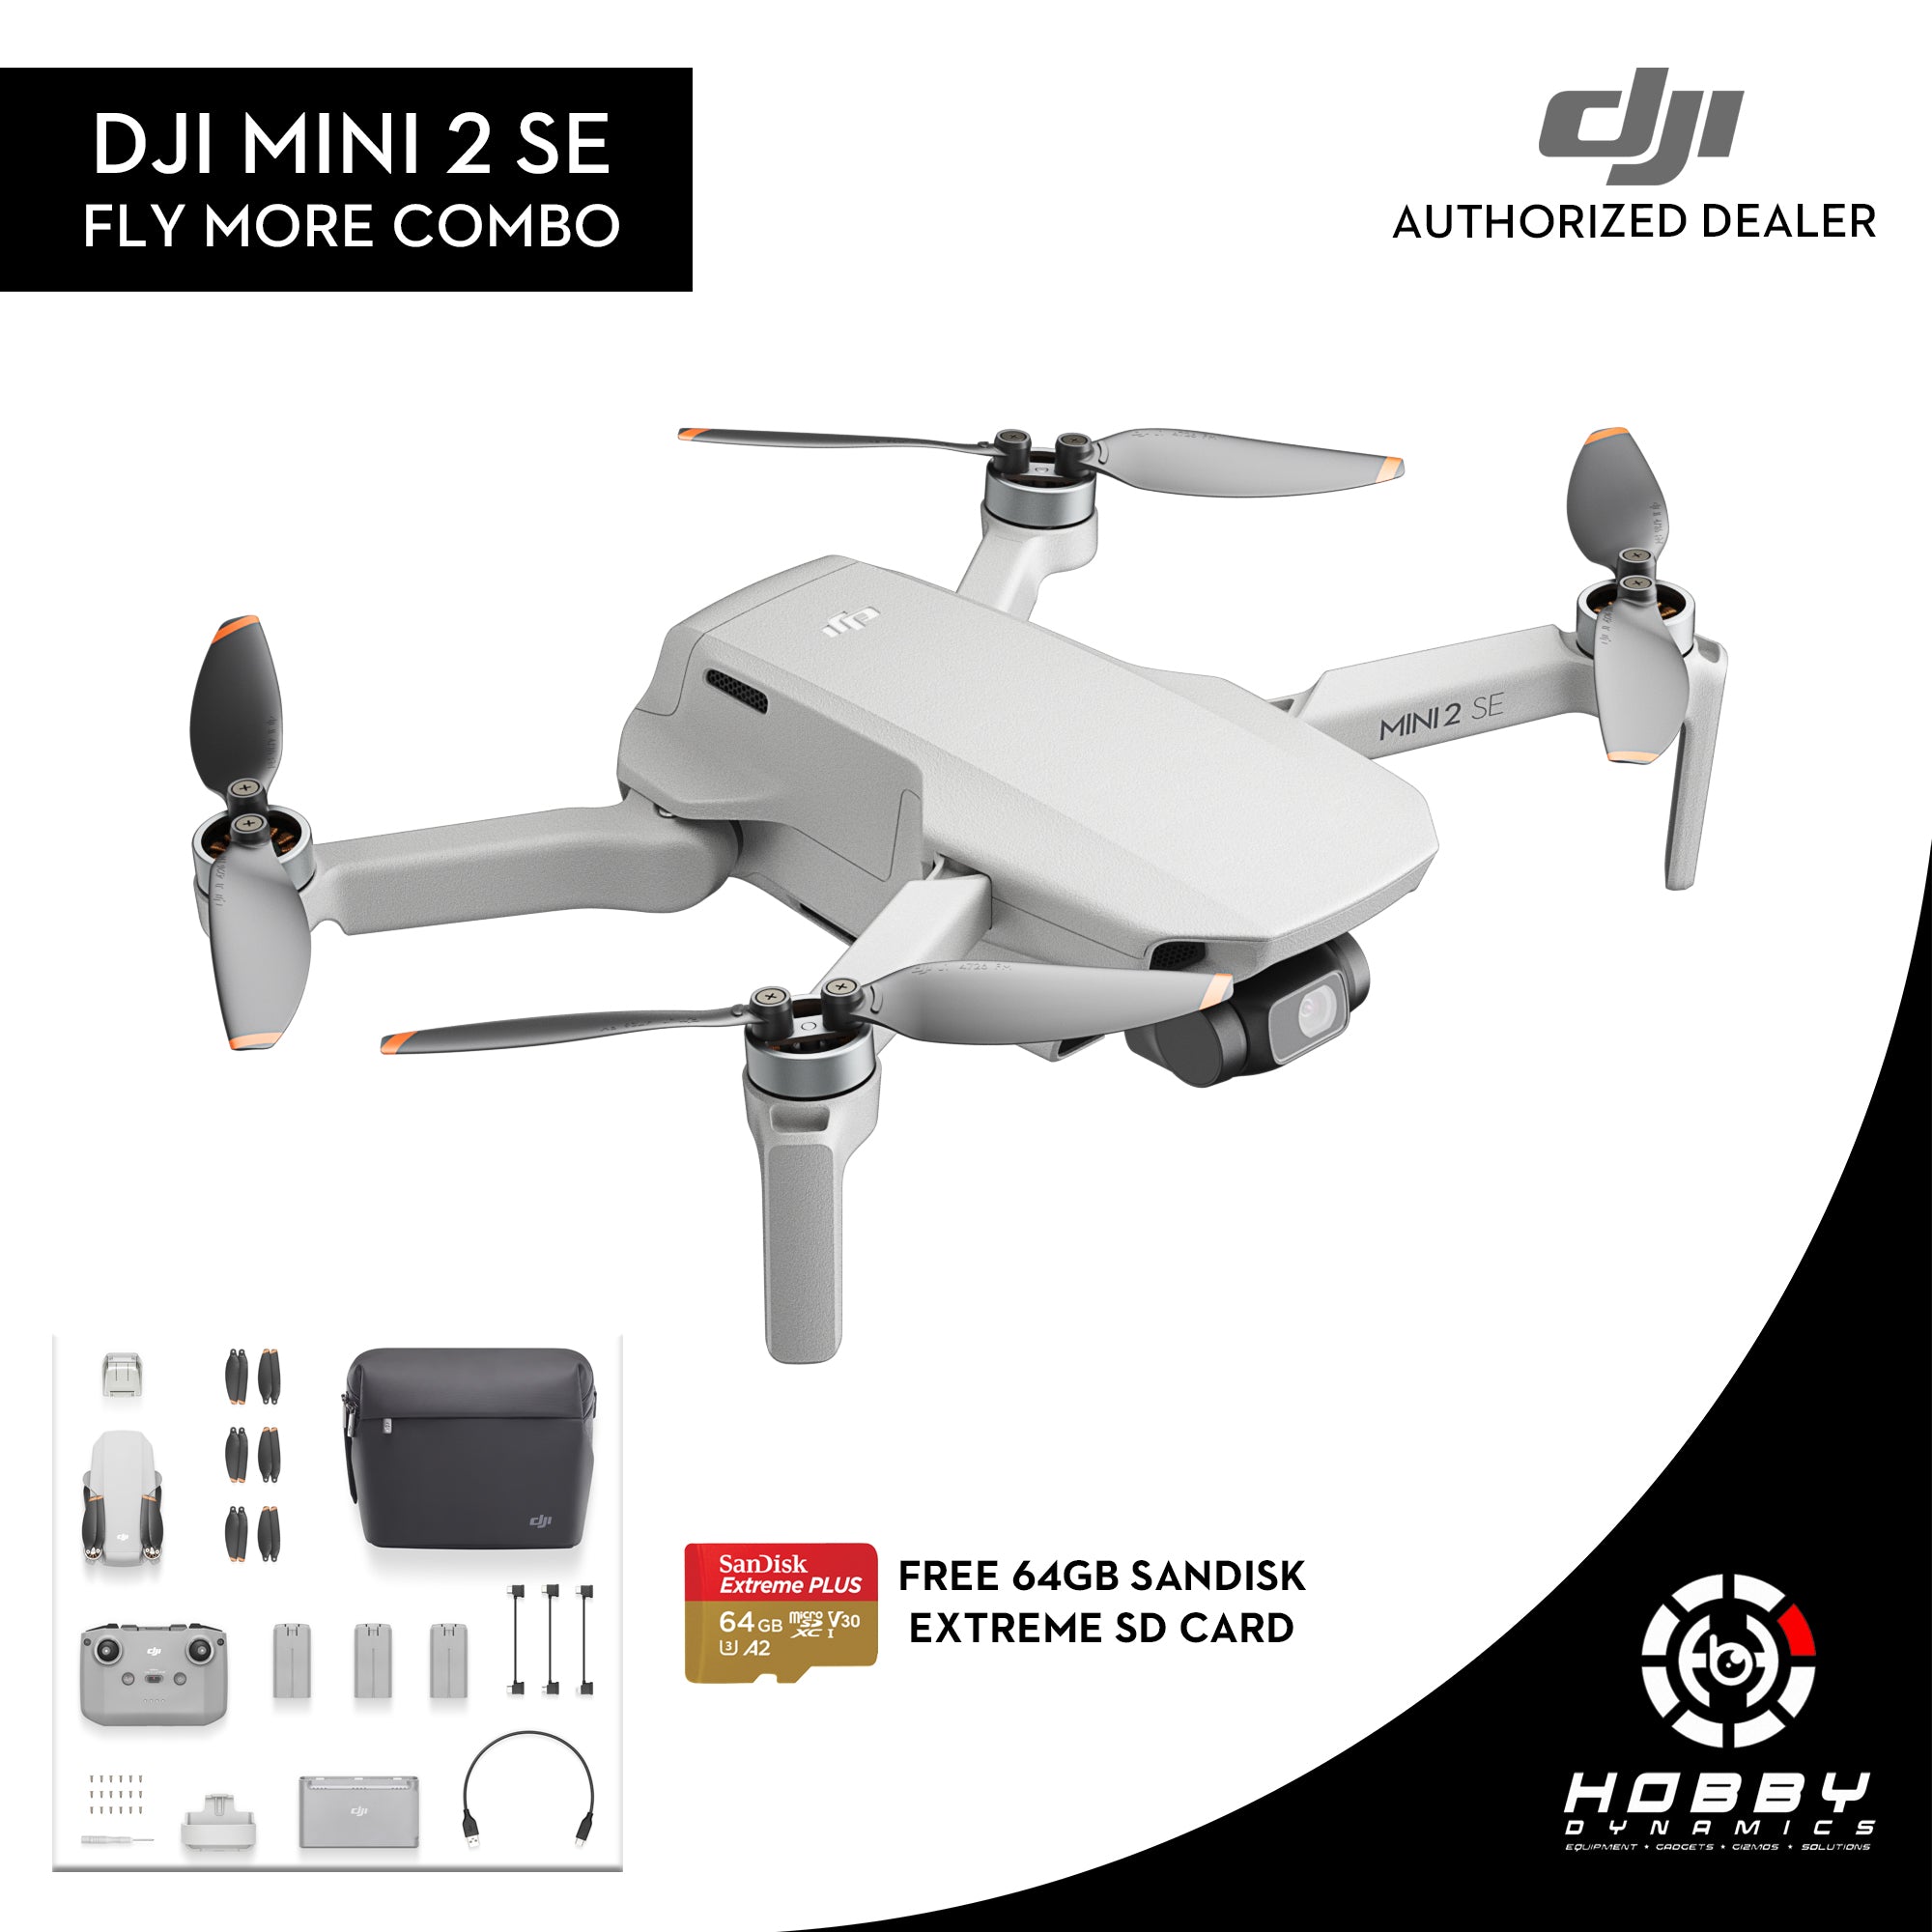 DJI Mini 2 SE Fly More Combo with FREE Sandisk Extreme 64GB SD